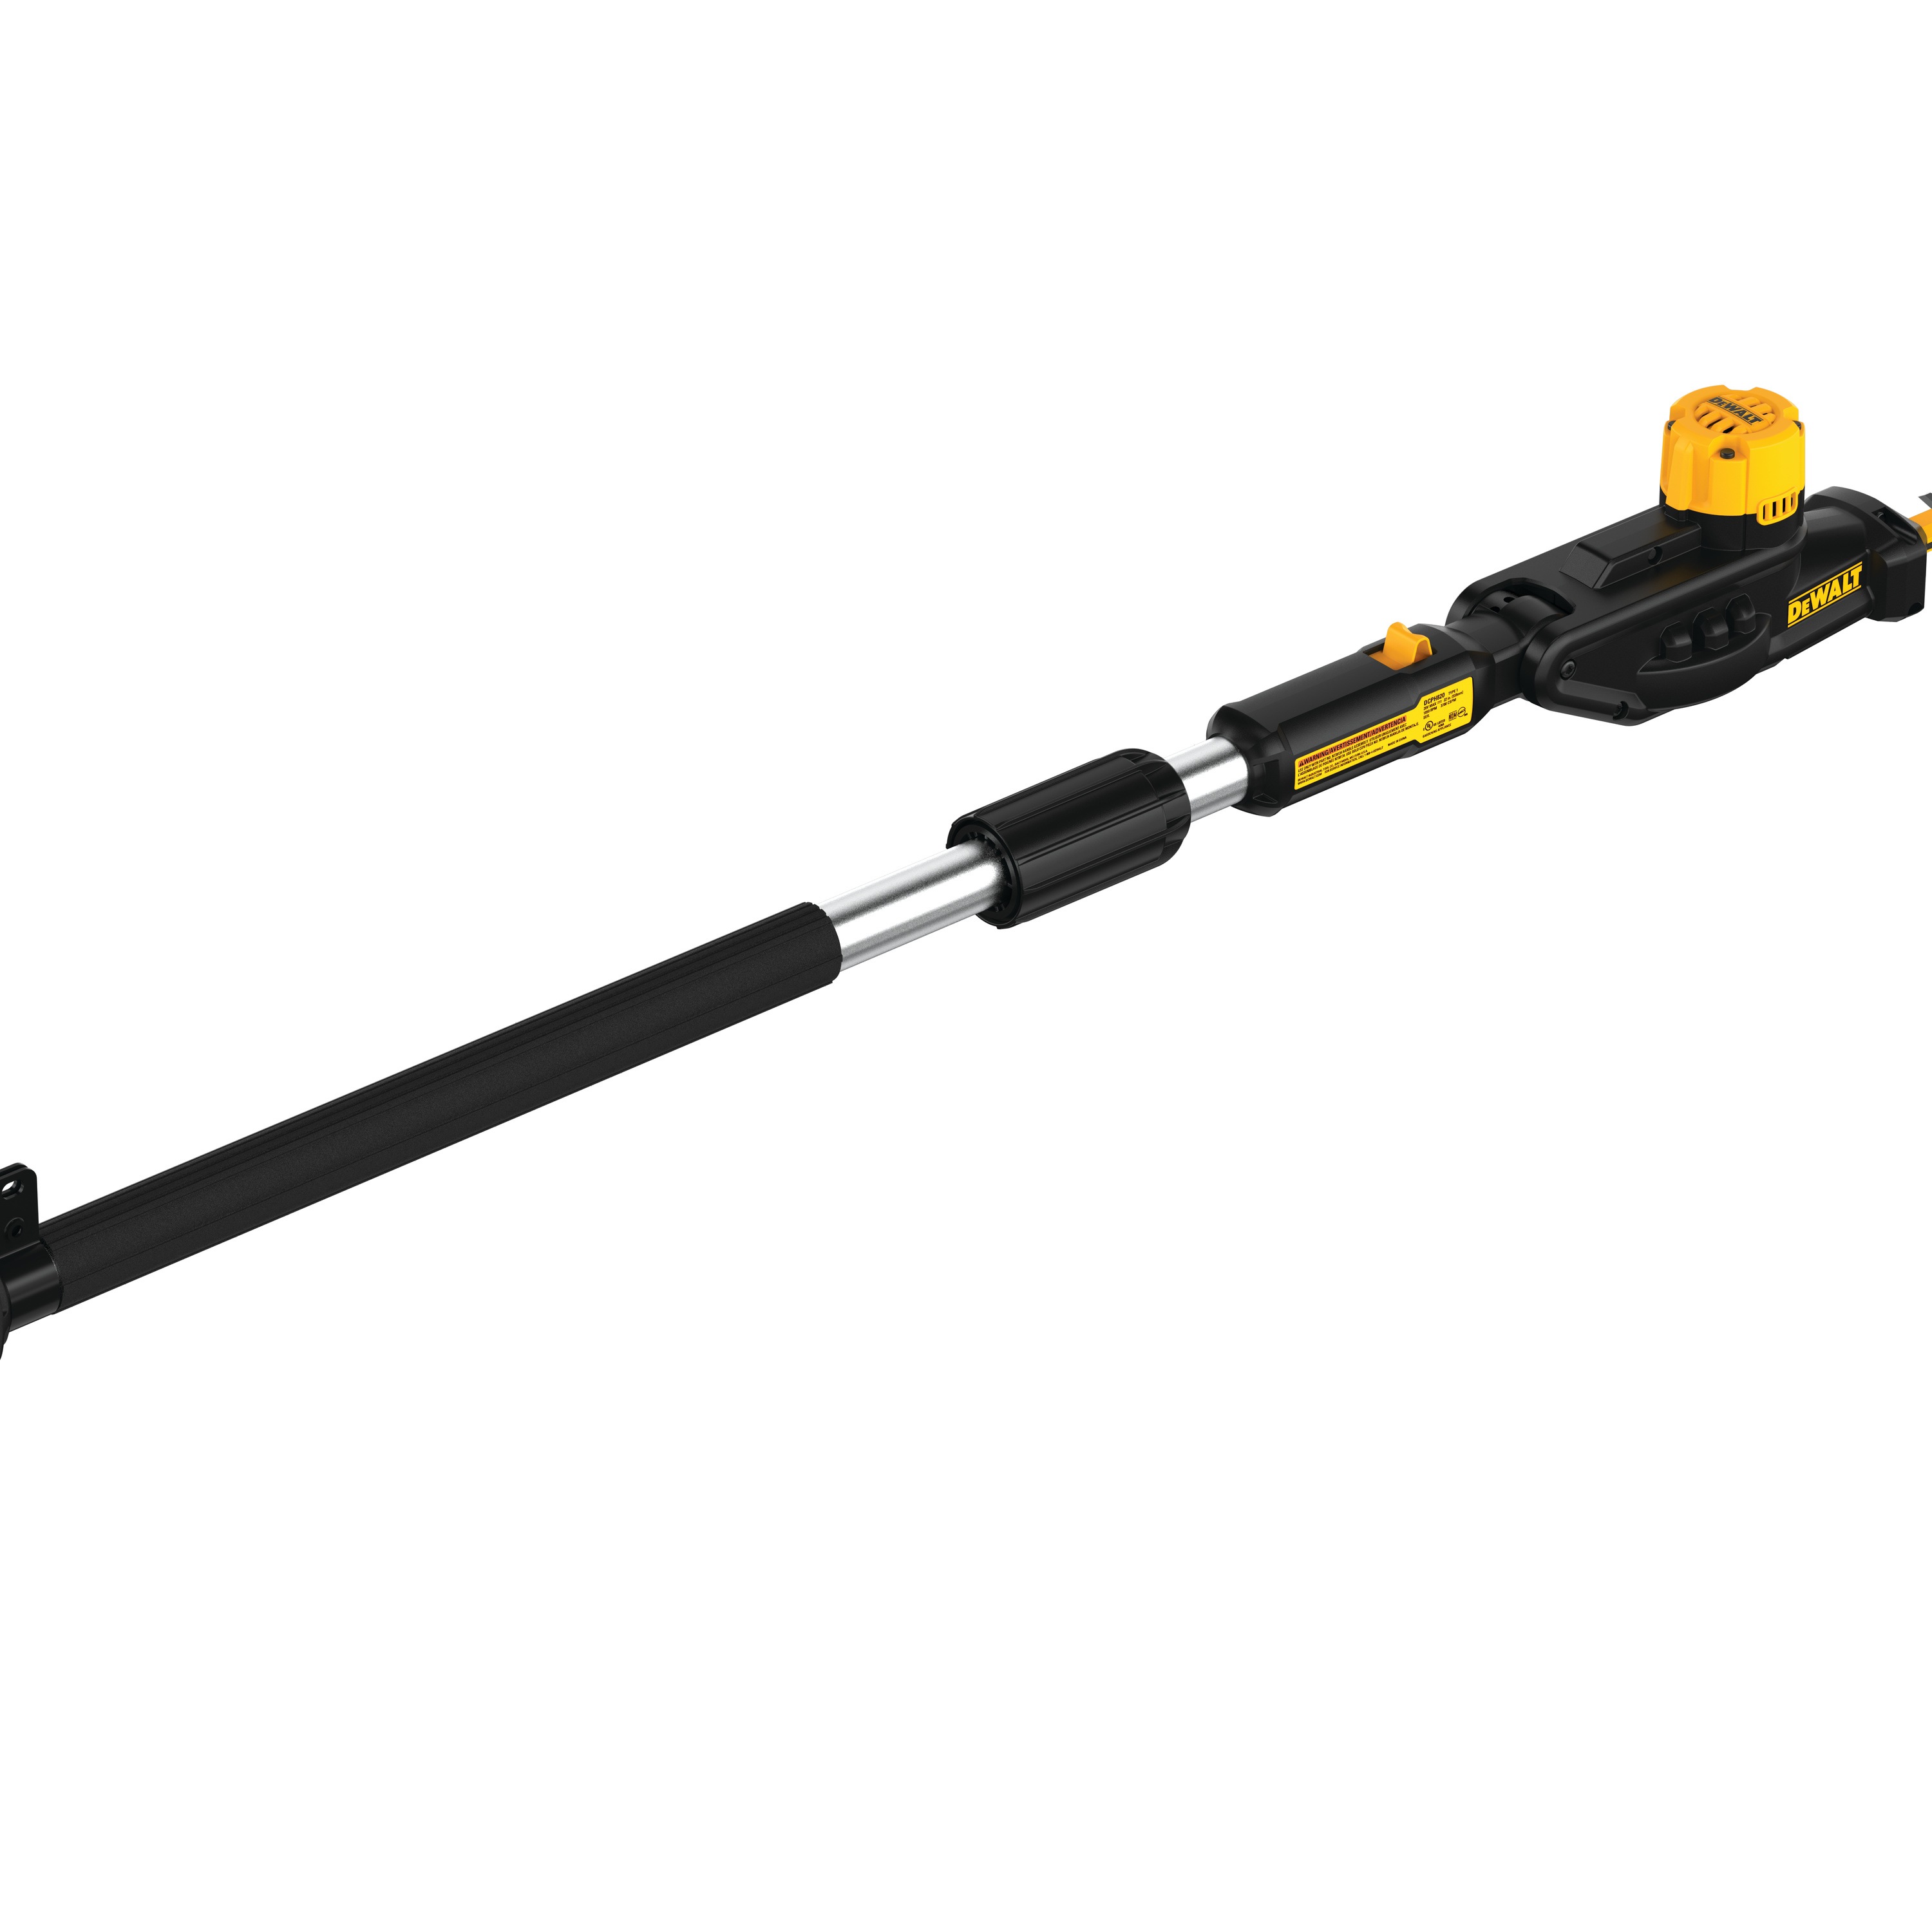 Profile of Pole Hedge Trimmer.